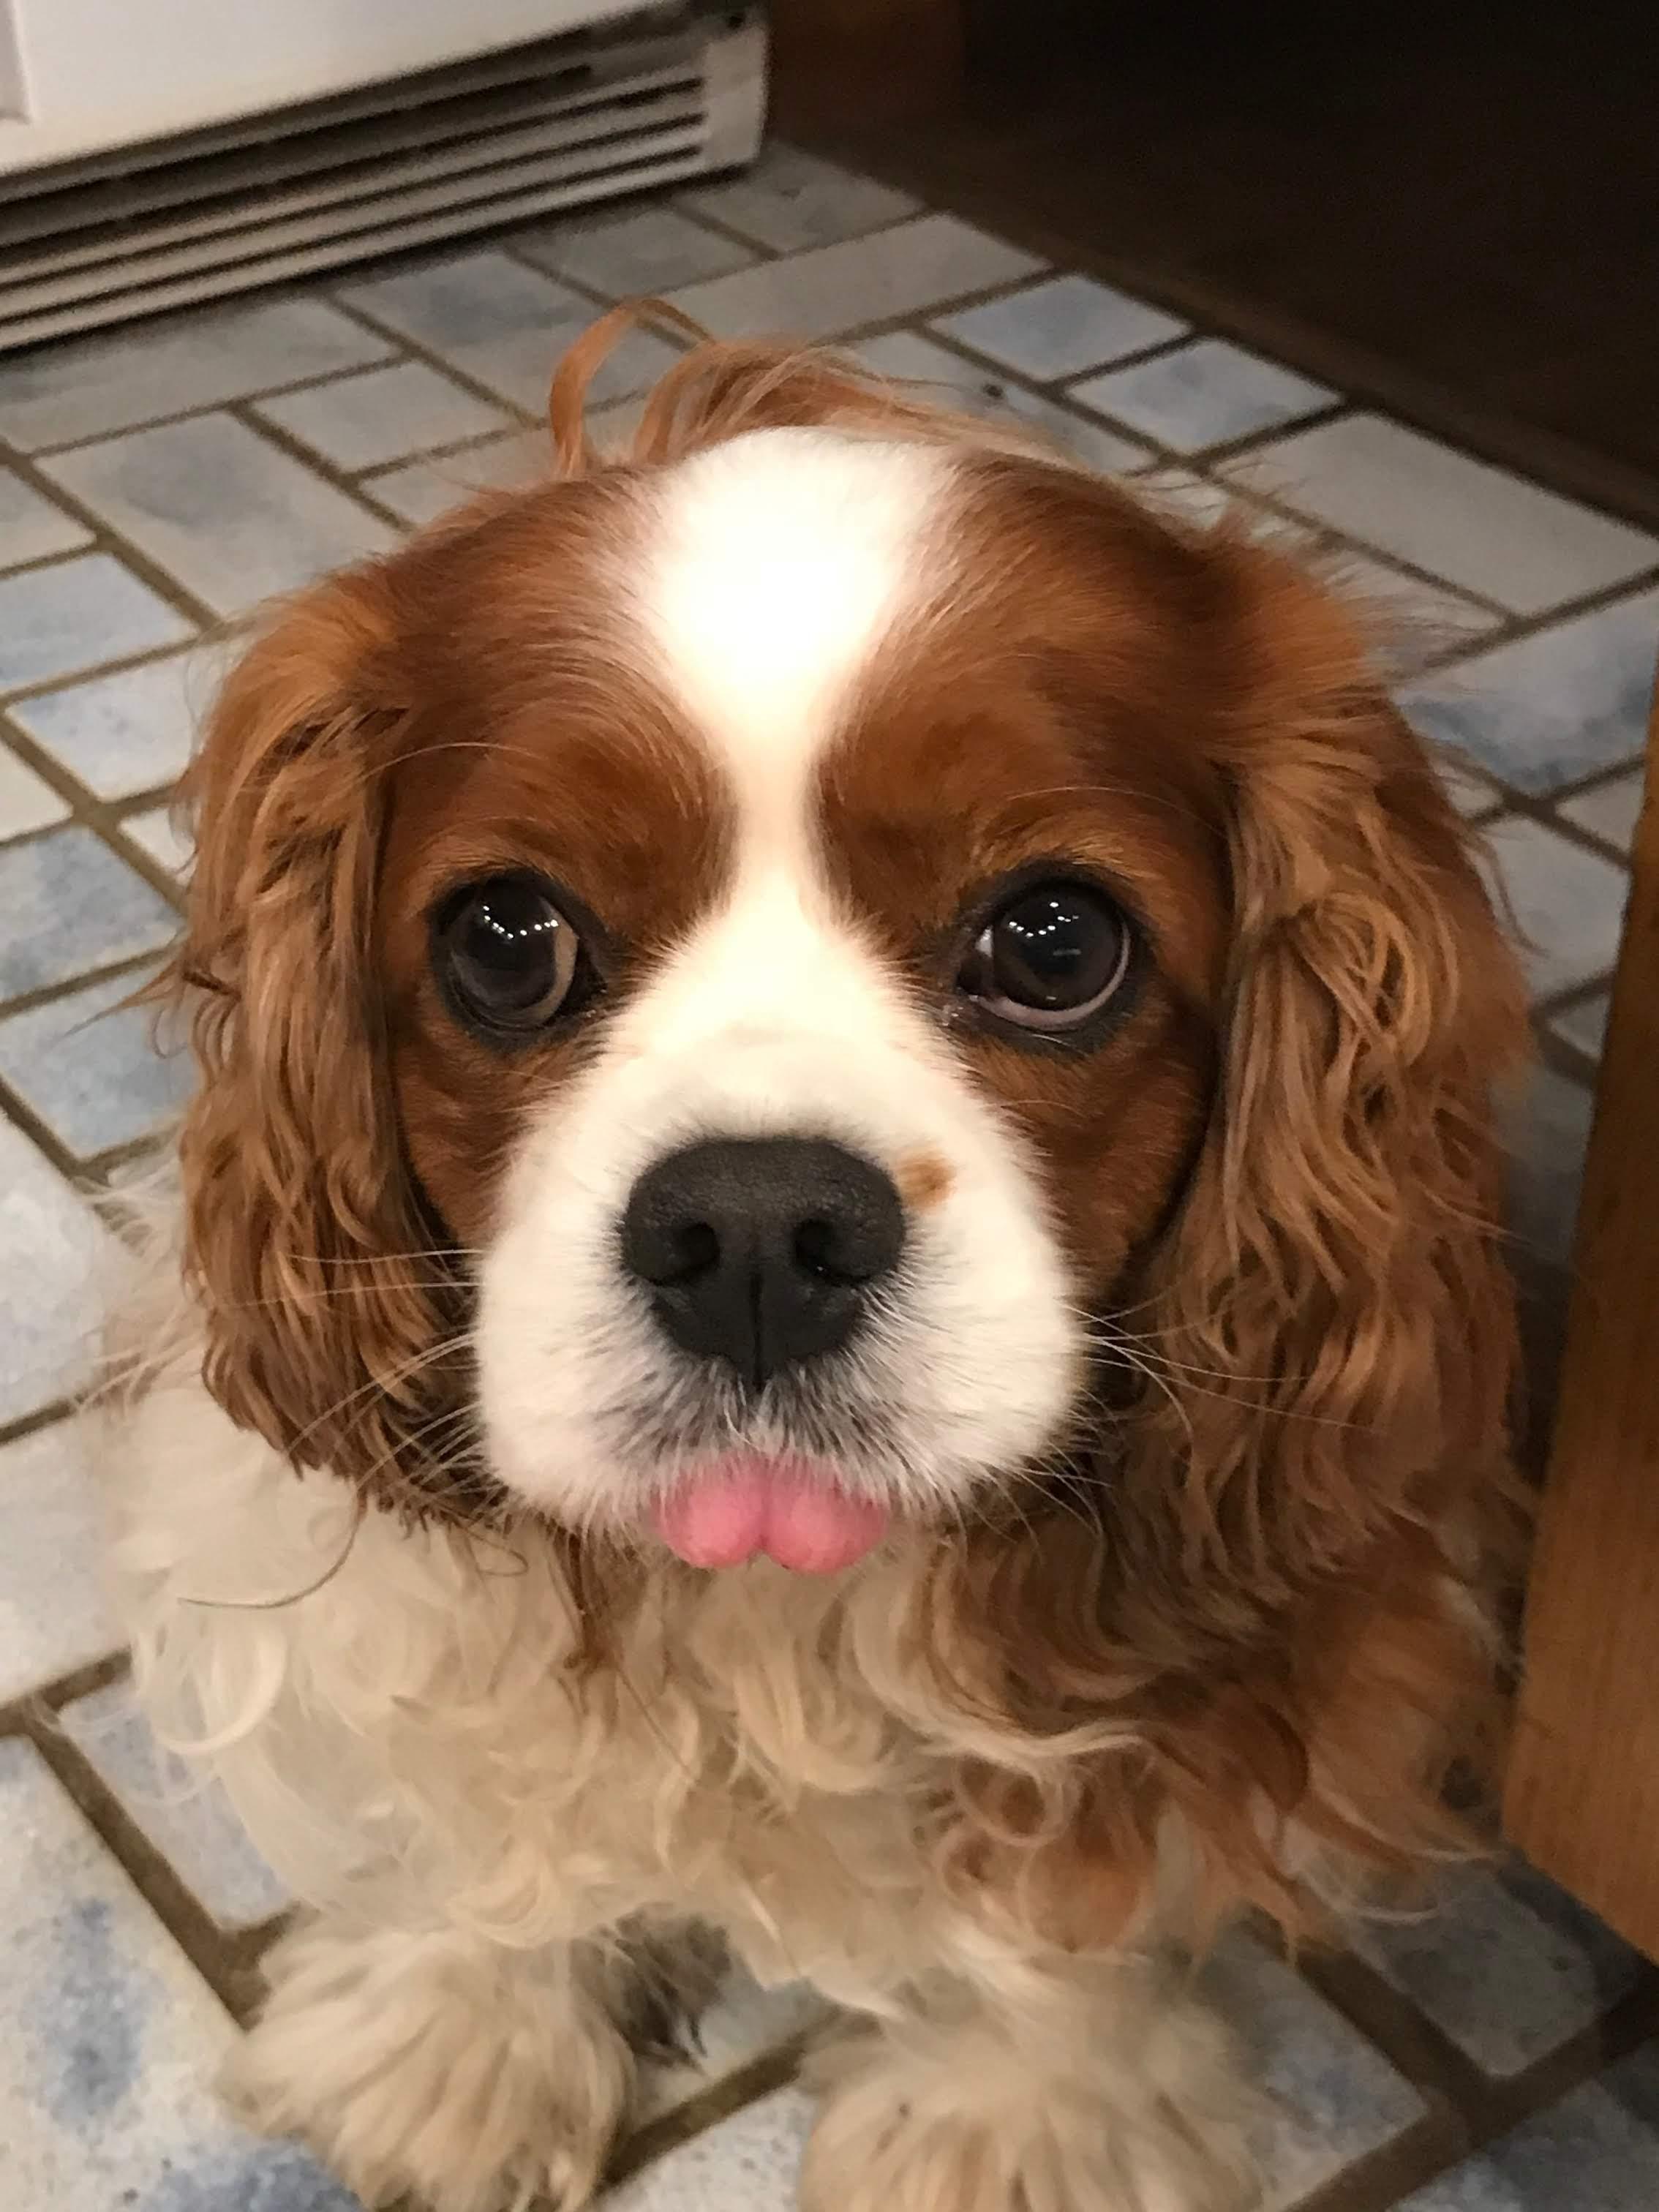 Cavalier King Charles Spaniel sitting on the floor with its small tongue out